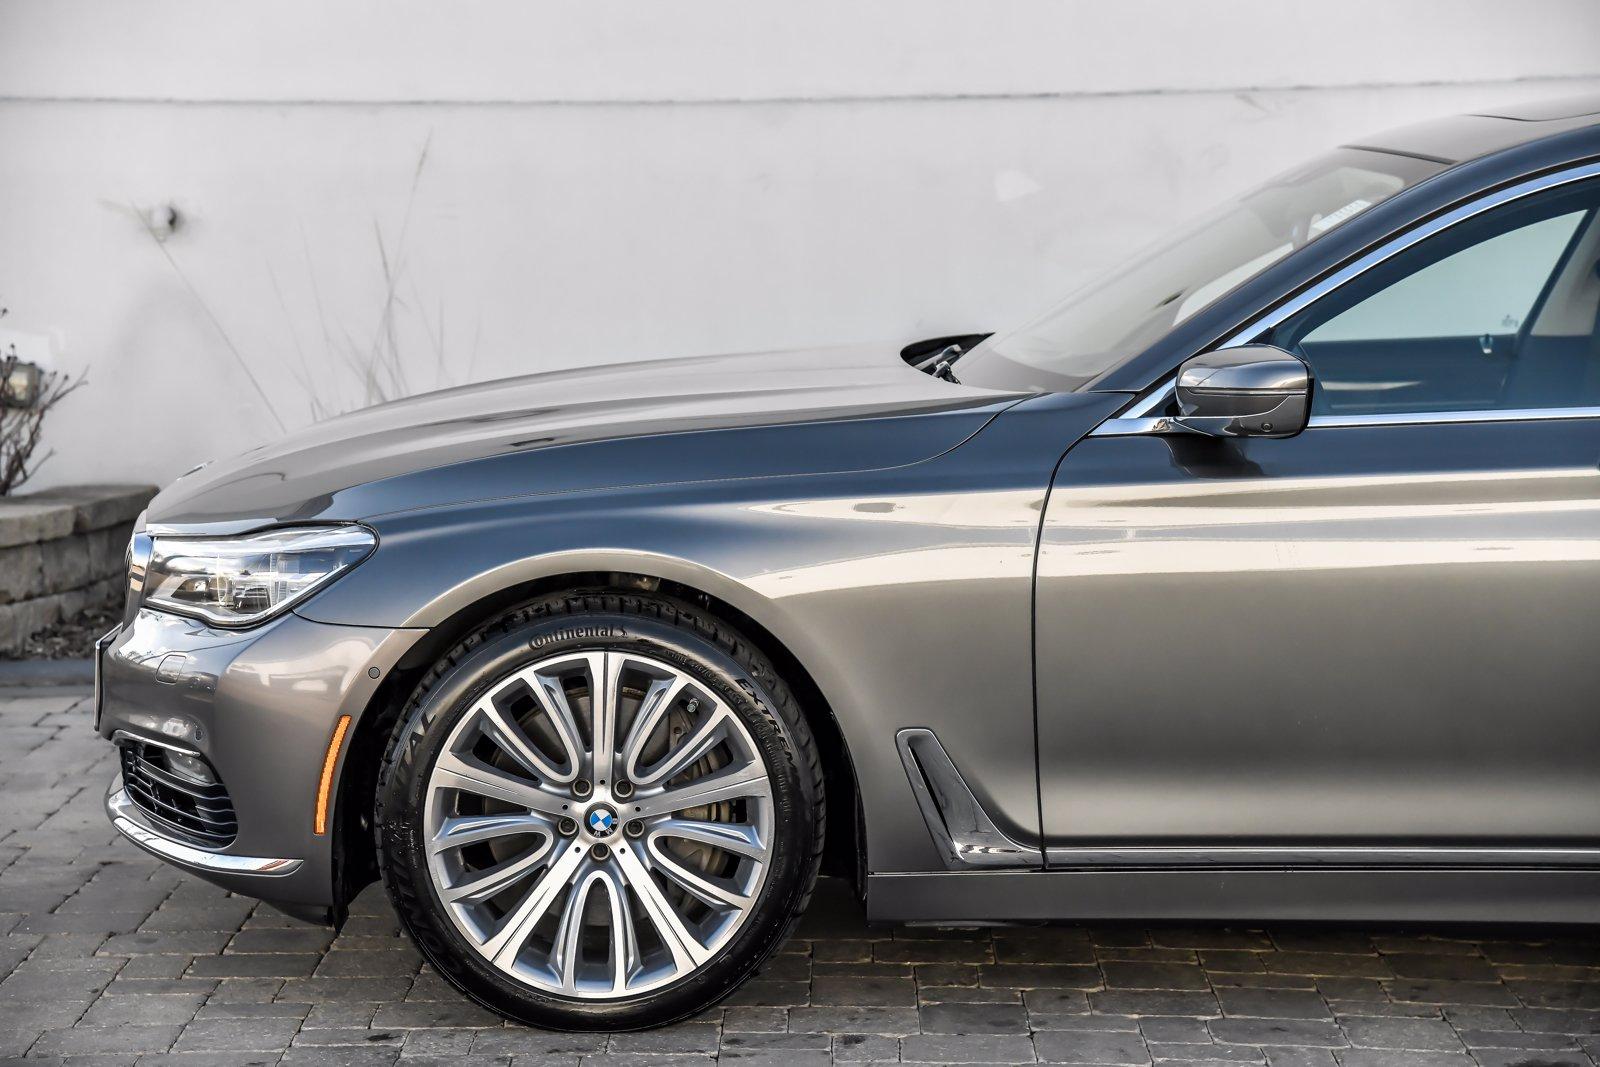 Used 2016 BMW 7 Series 750i xDrive Autobahn Executive Rear Ent | Downers Grove, IL